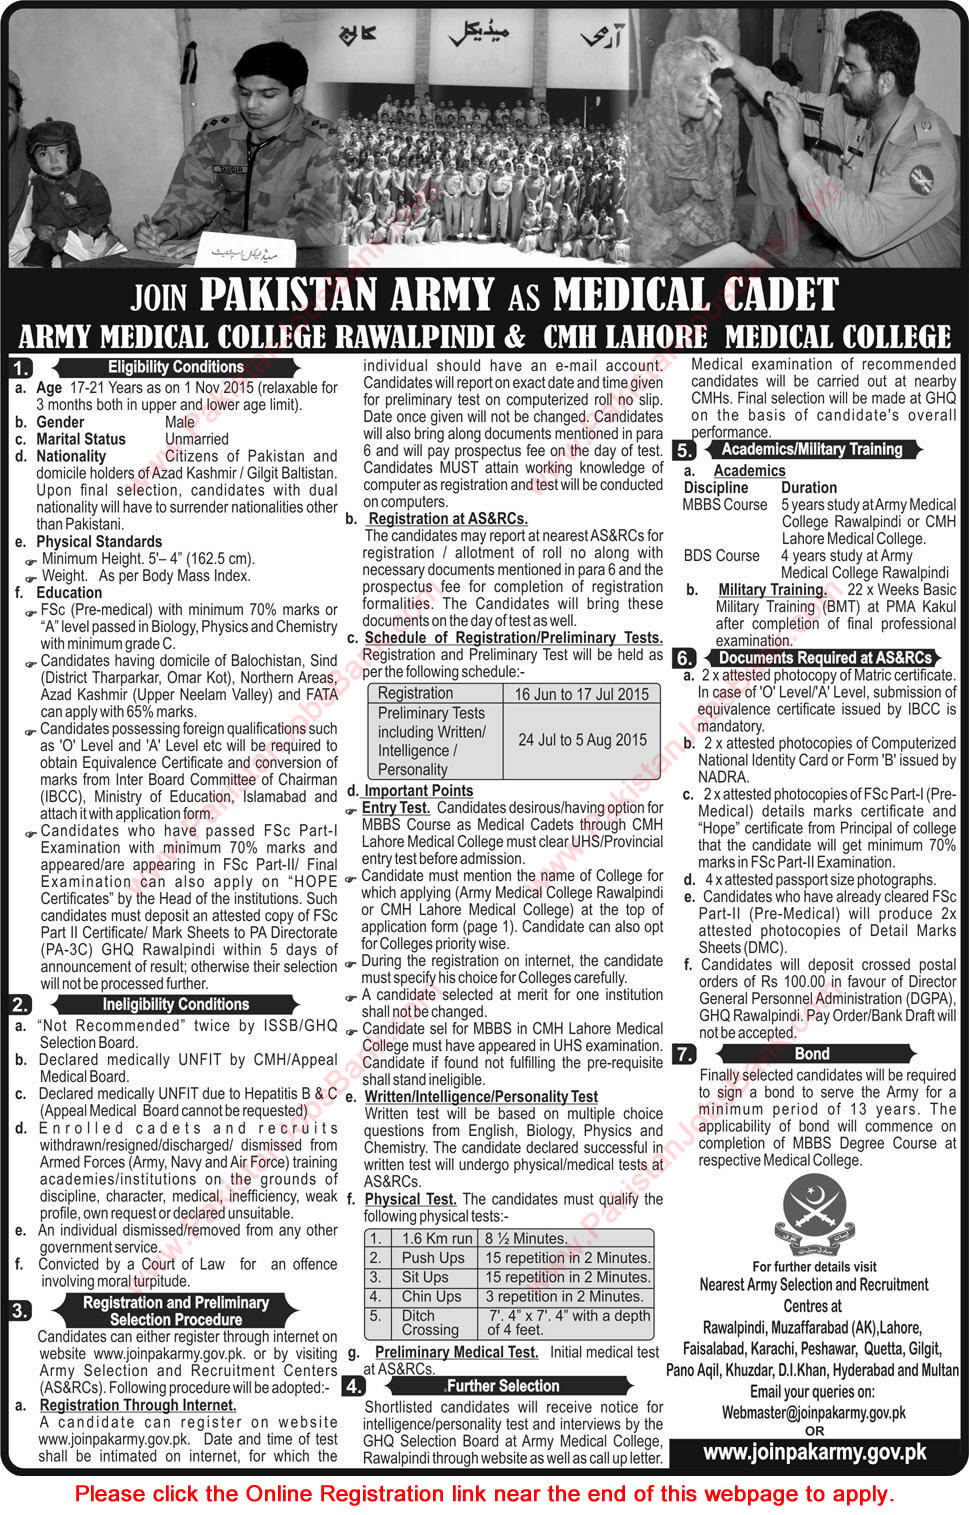 Join Pakistan Army as Medical Cadet 2015 June Online Registration Latest